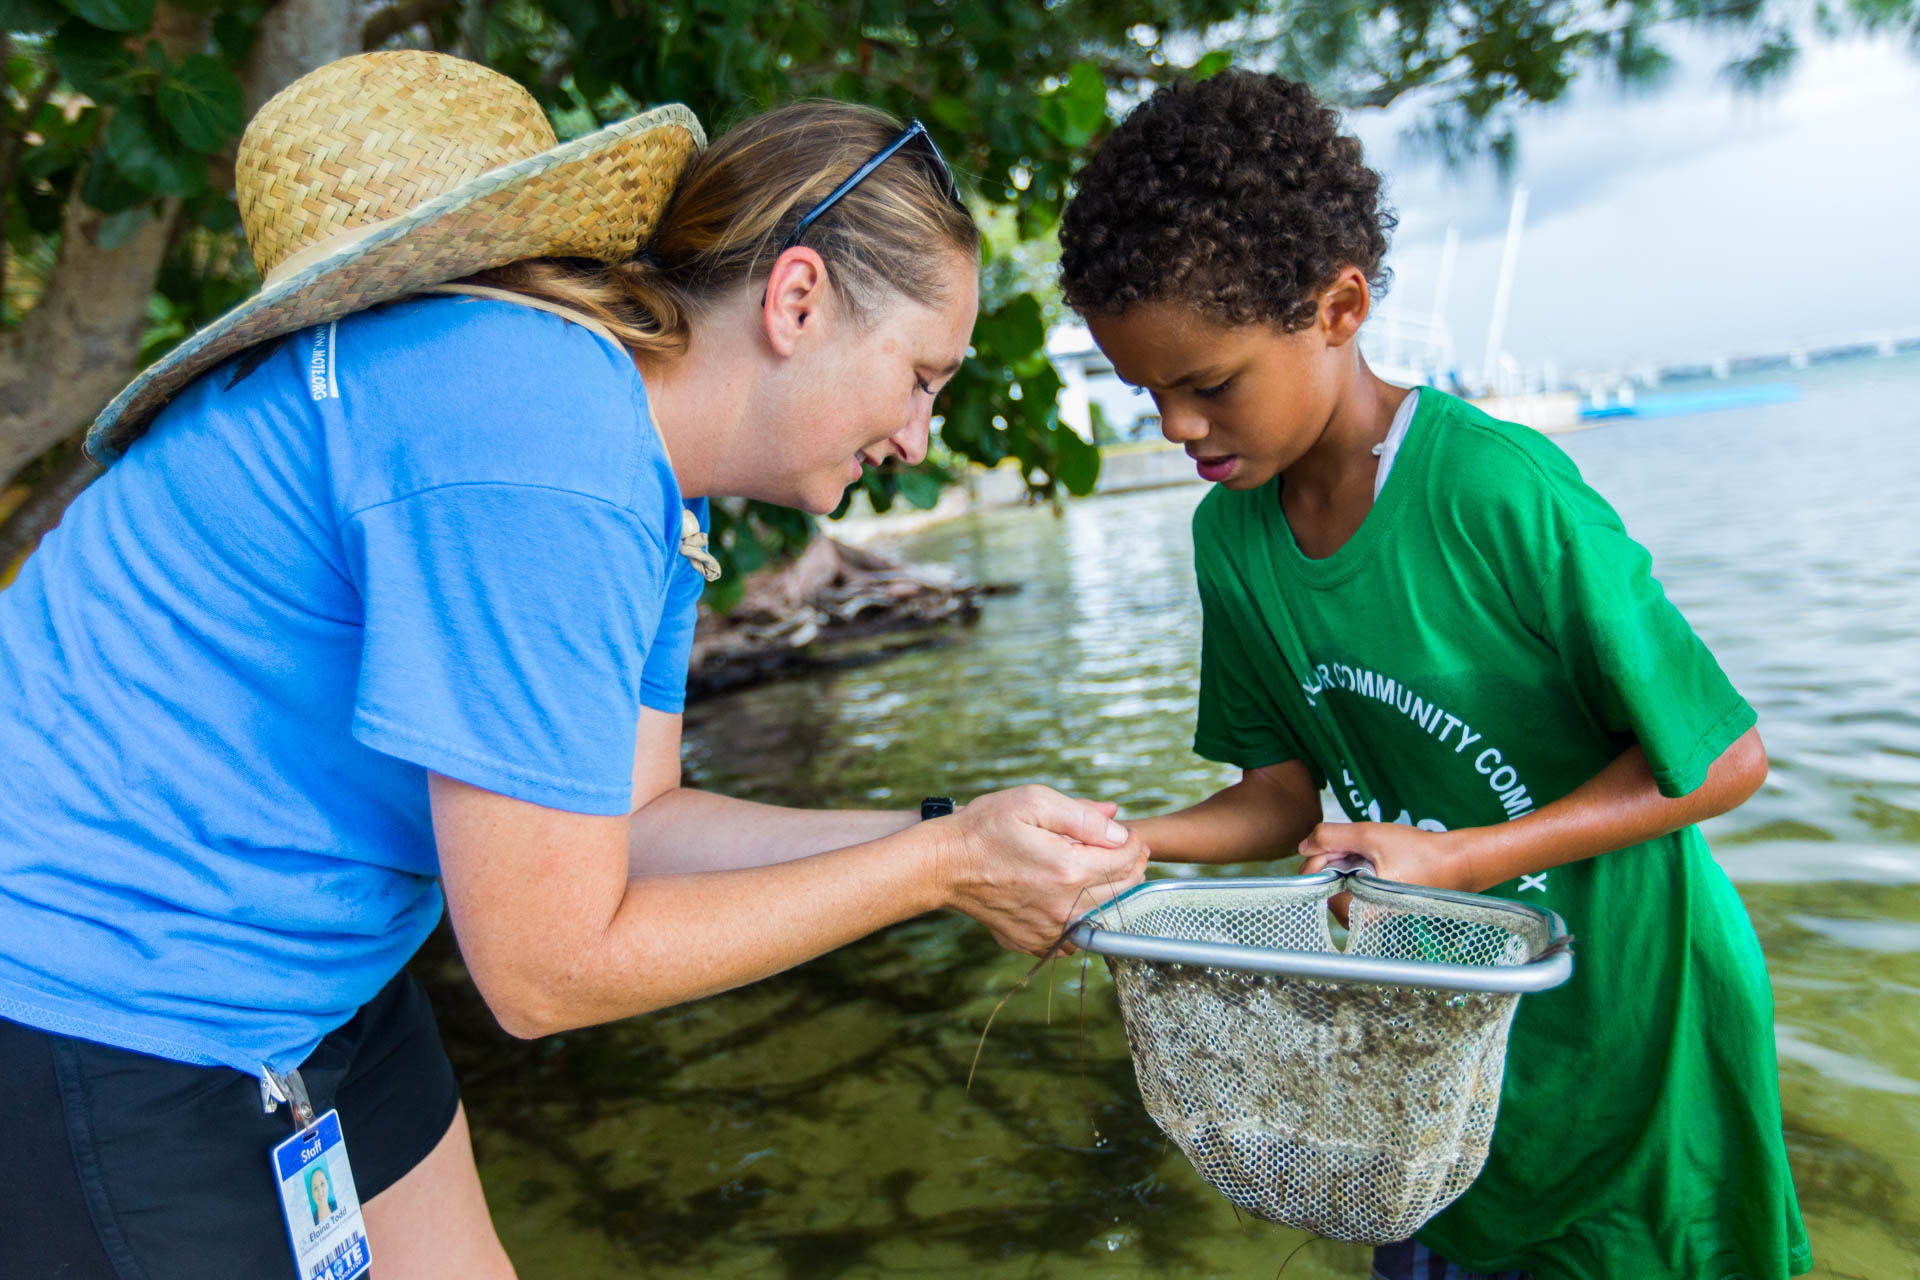 Mote's Community Engagement Programs shares marine science education with underrepresented groups of young learners in southwest Florida.